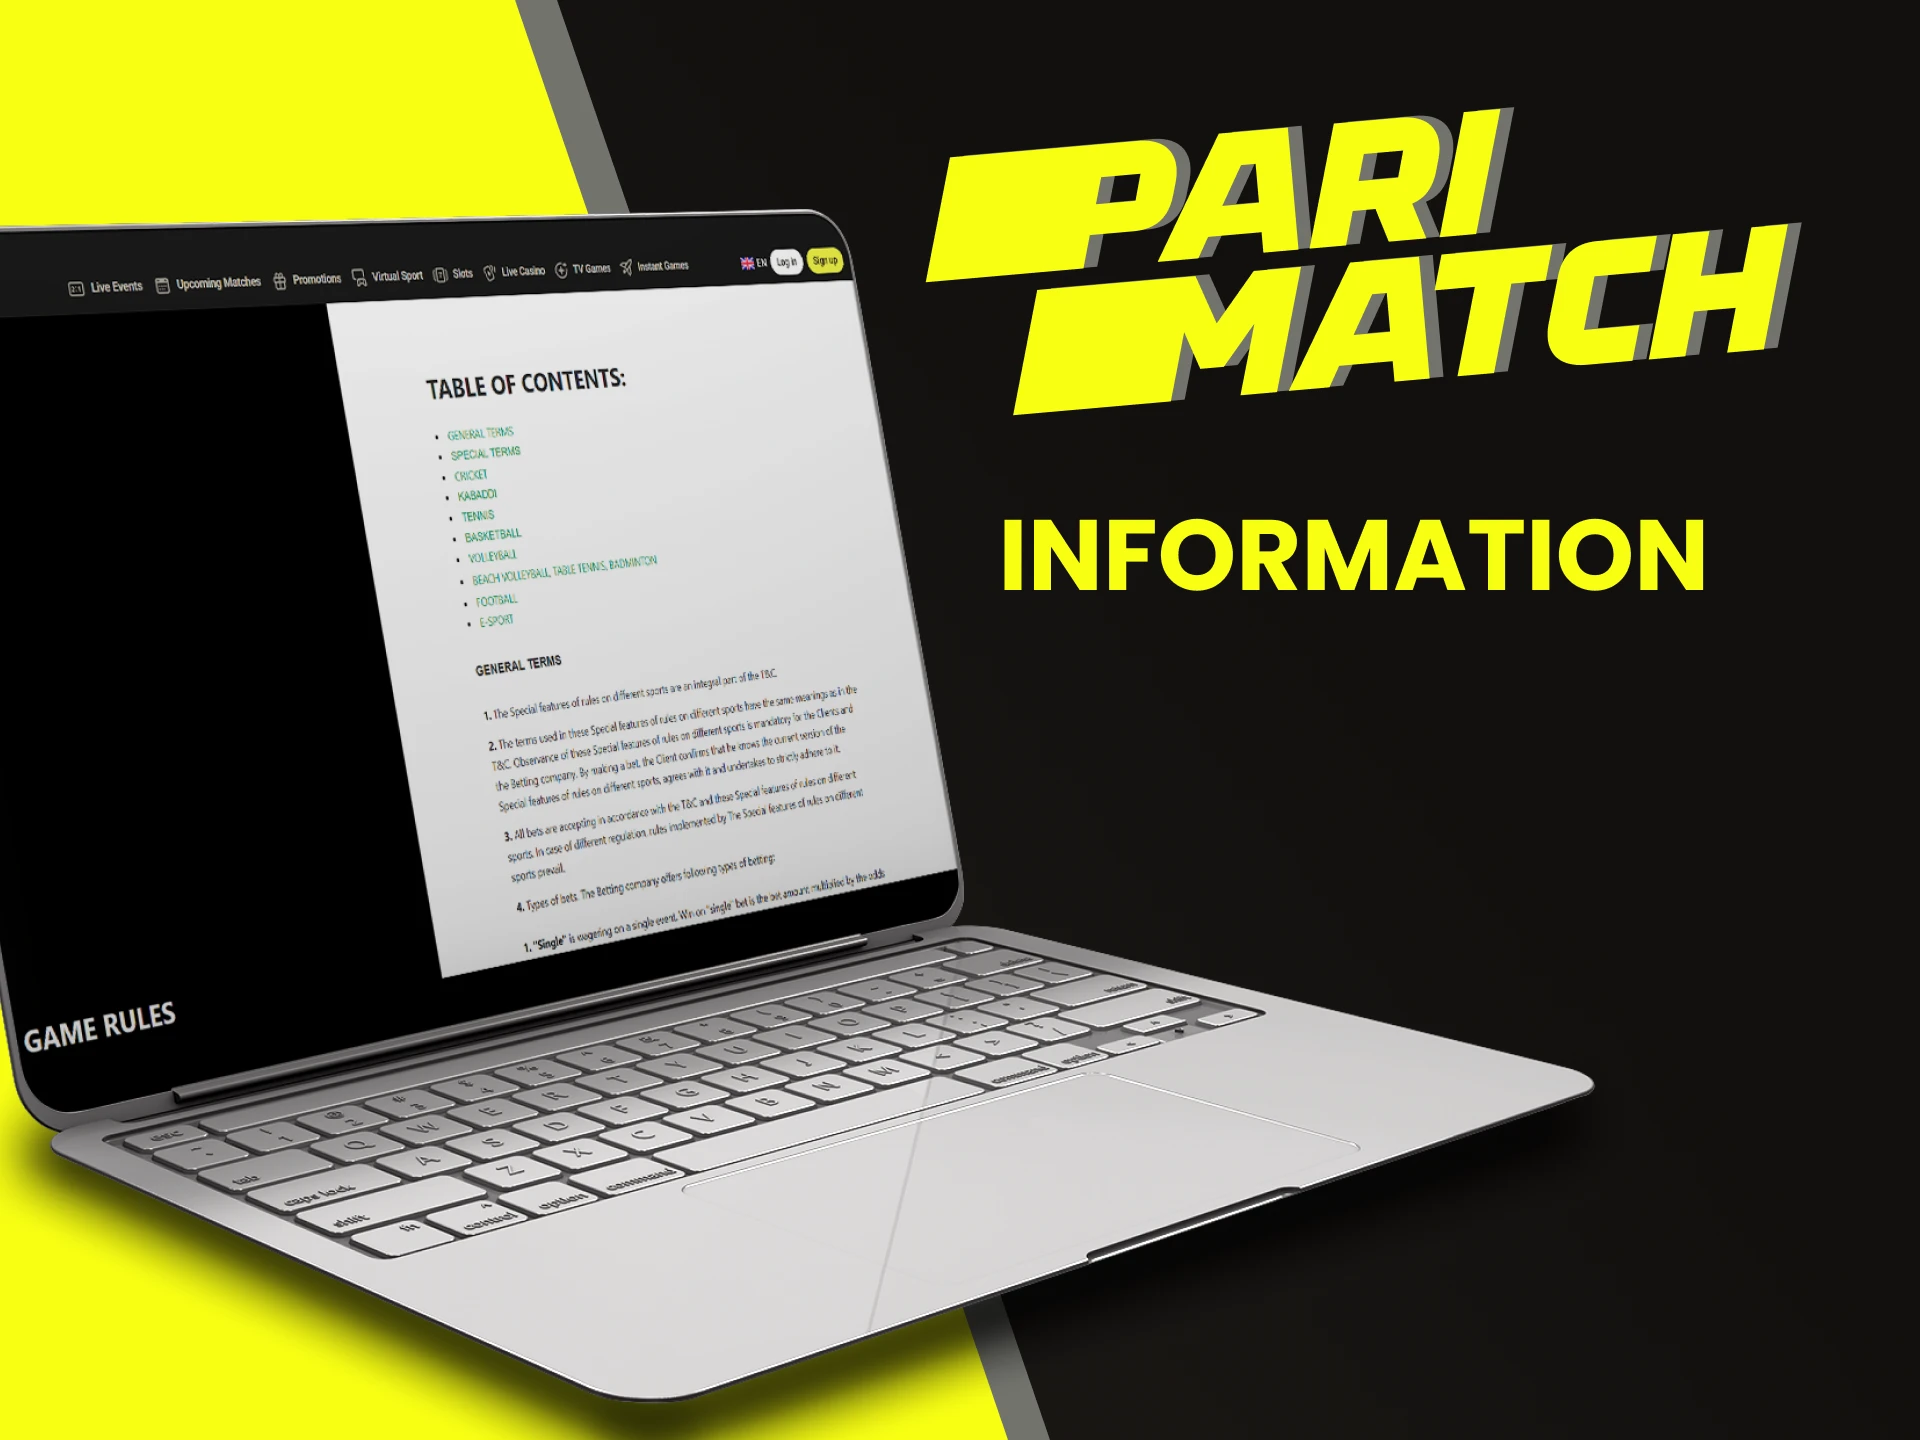 We will provide all the information about the Parimatch website.